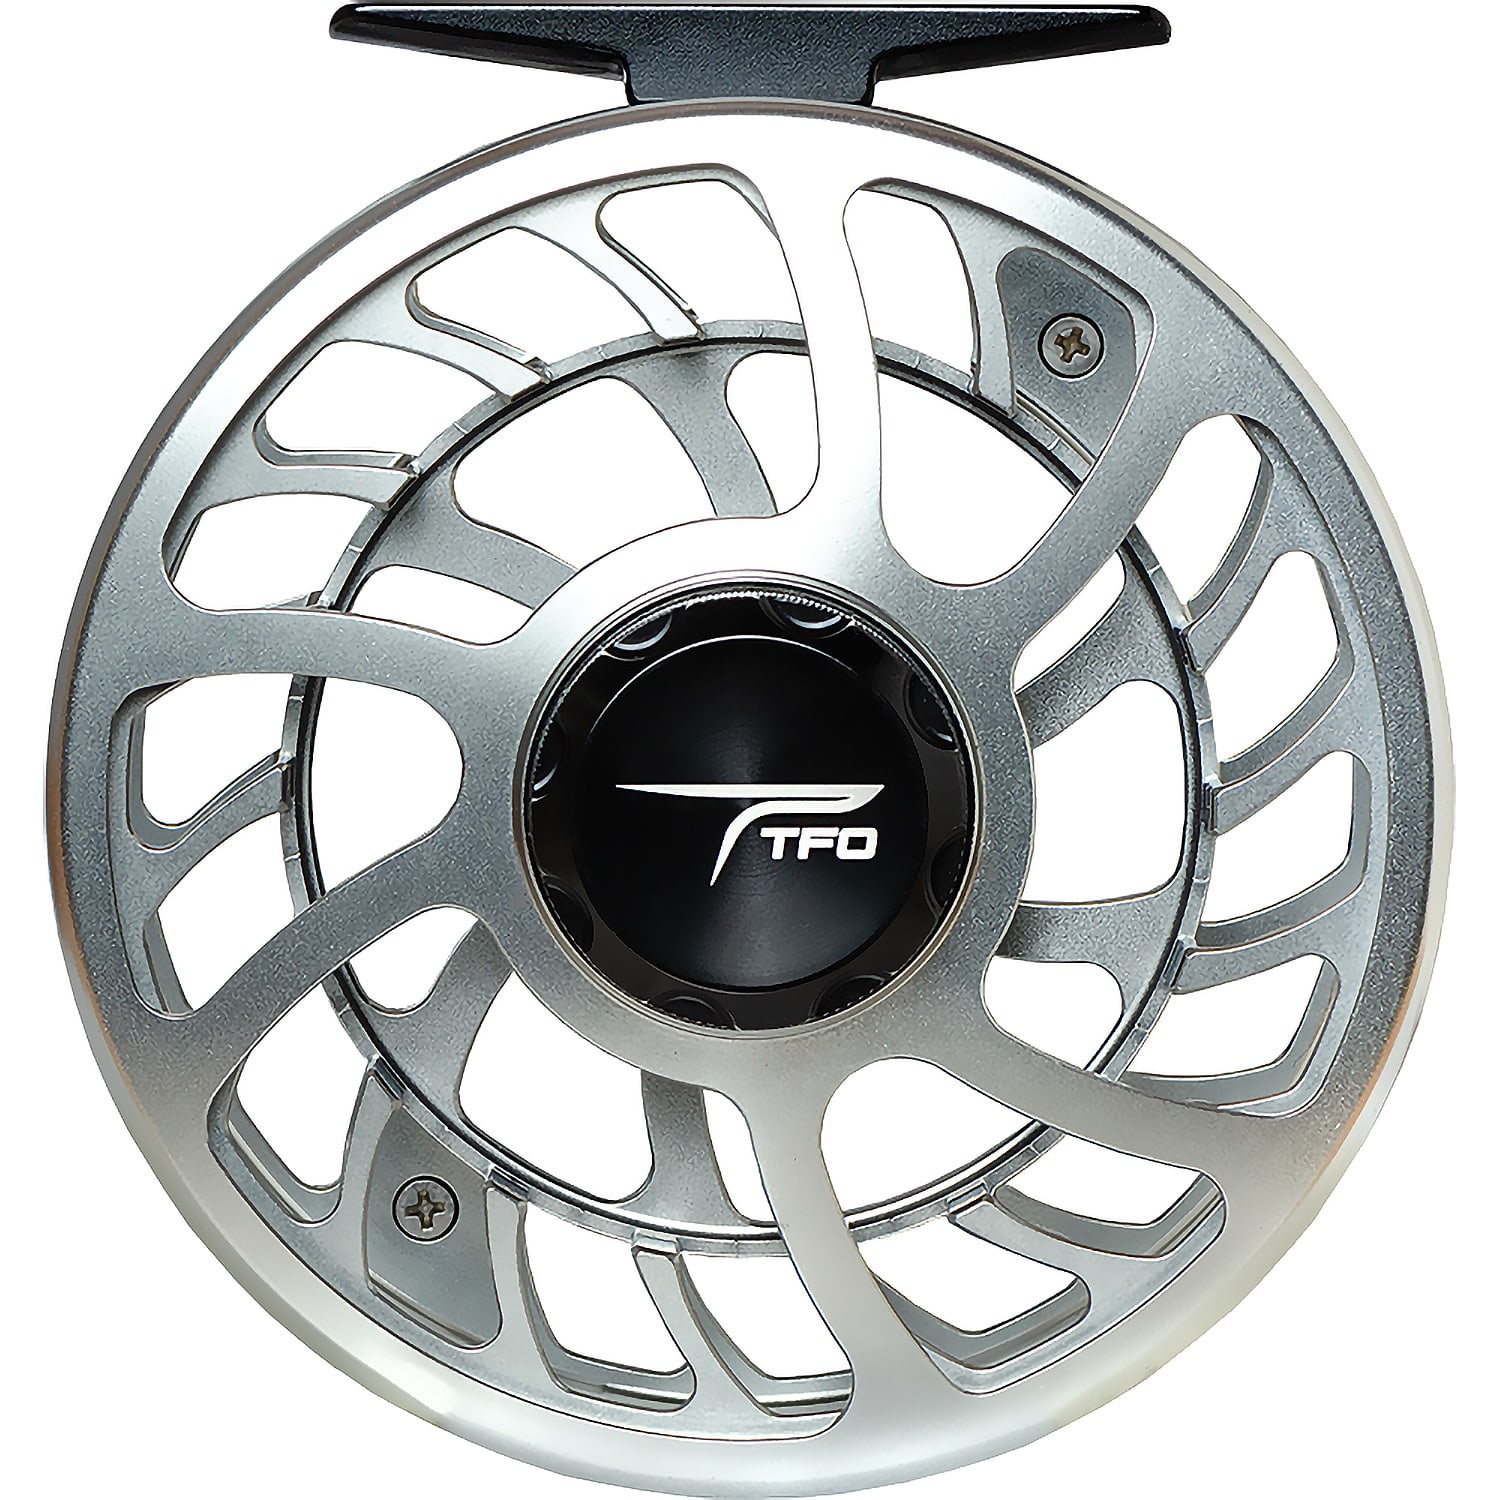 White River™ Fly Shop® Kingfisher Fly Reel